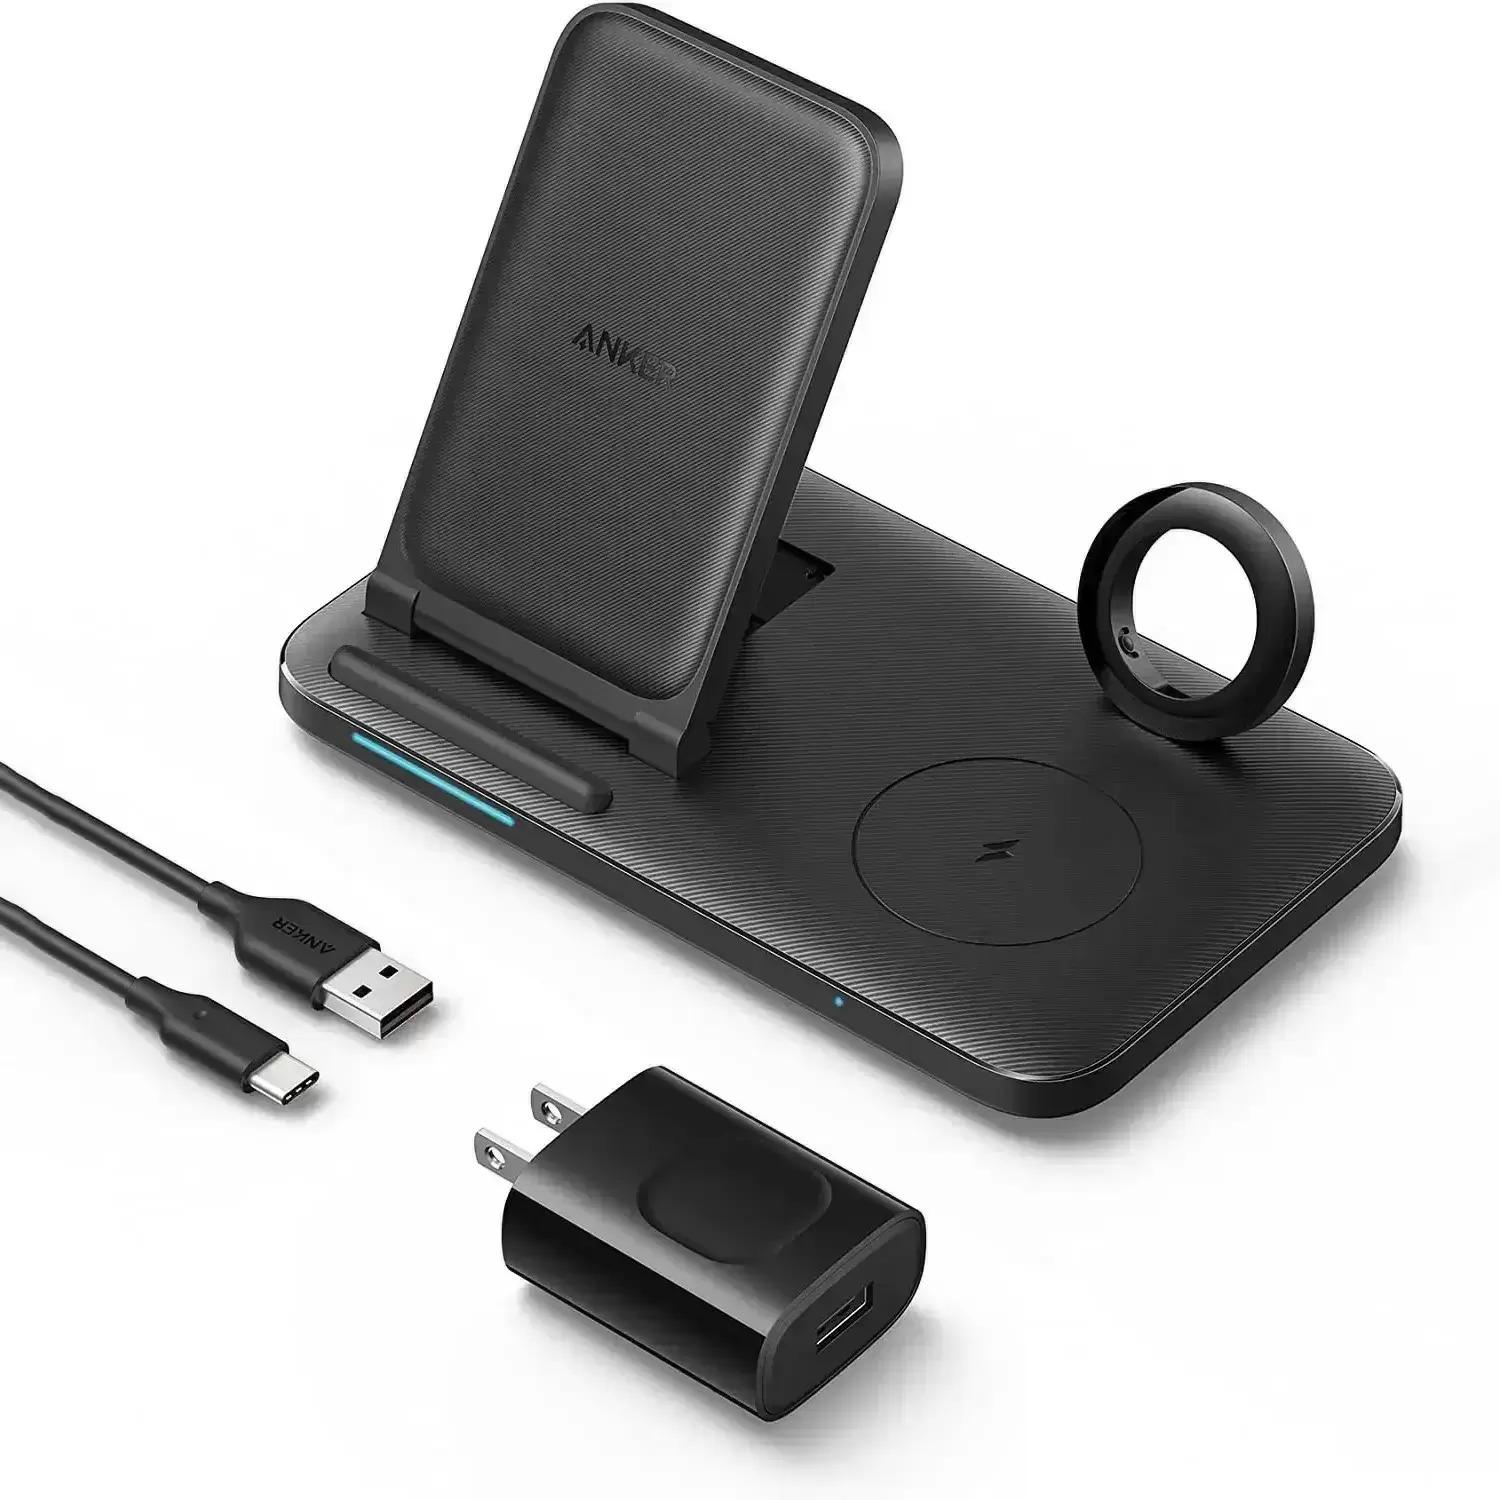 Anker 335 Foldable 3-in-1 Wireless Charging Station with Adapter for $16.99